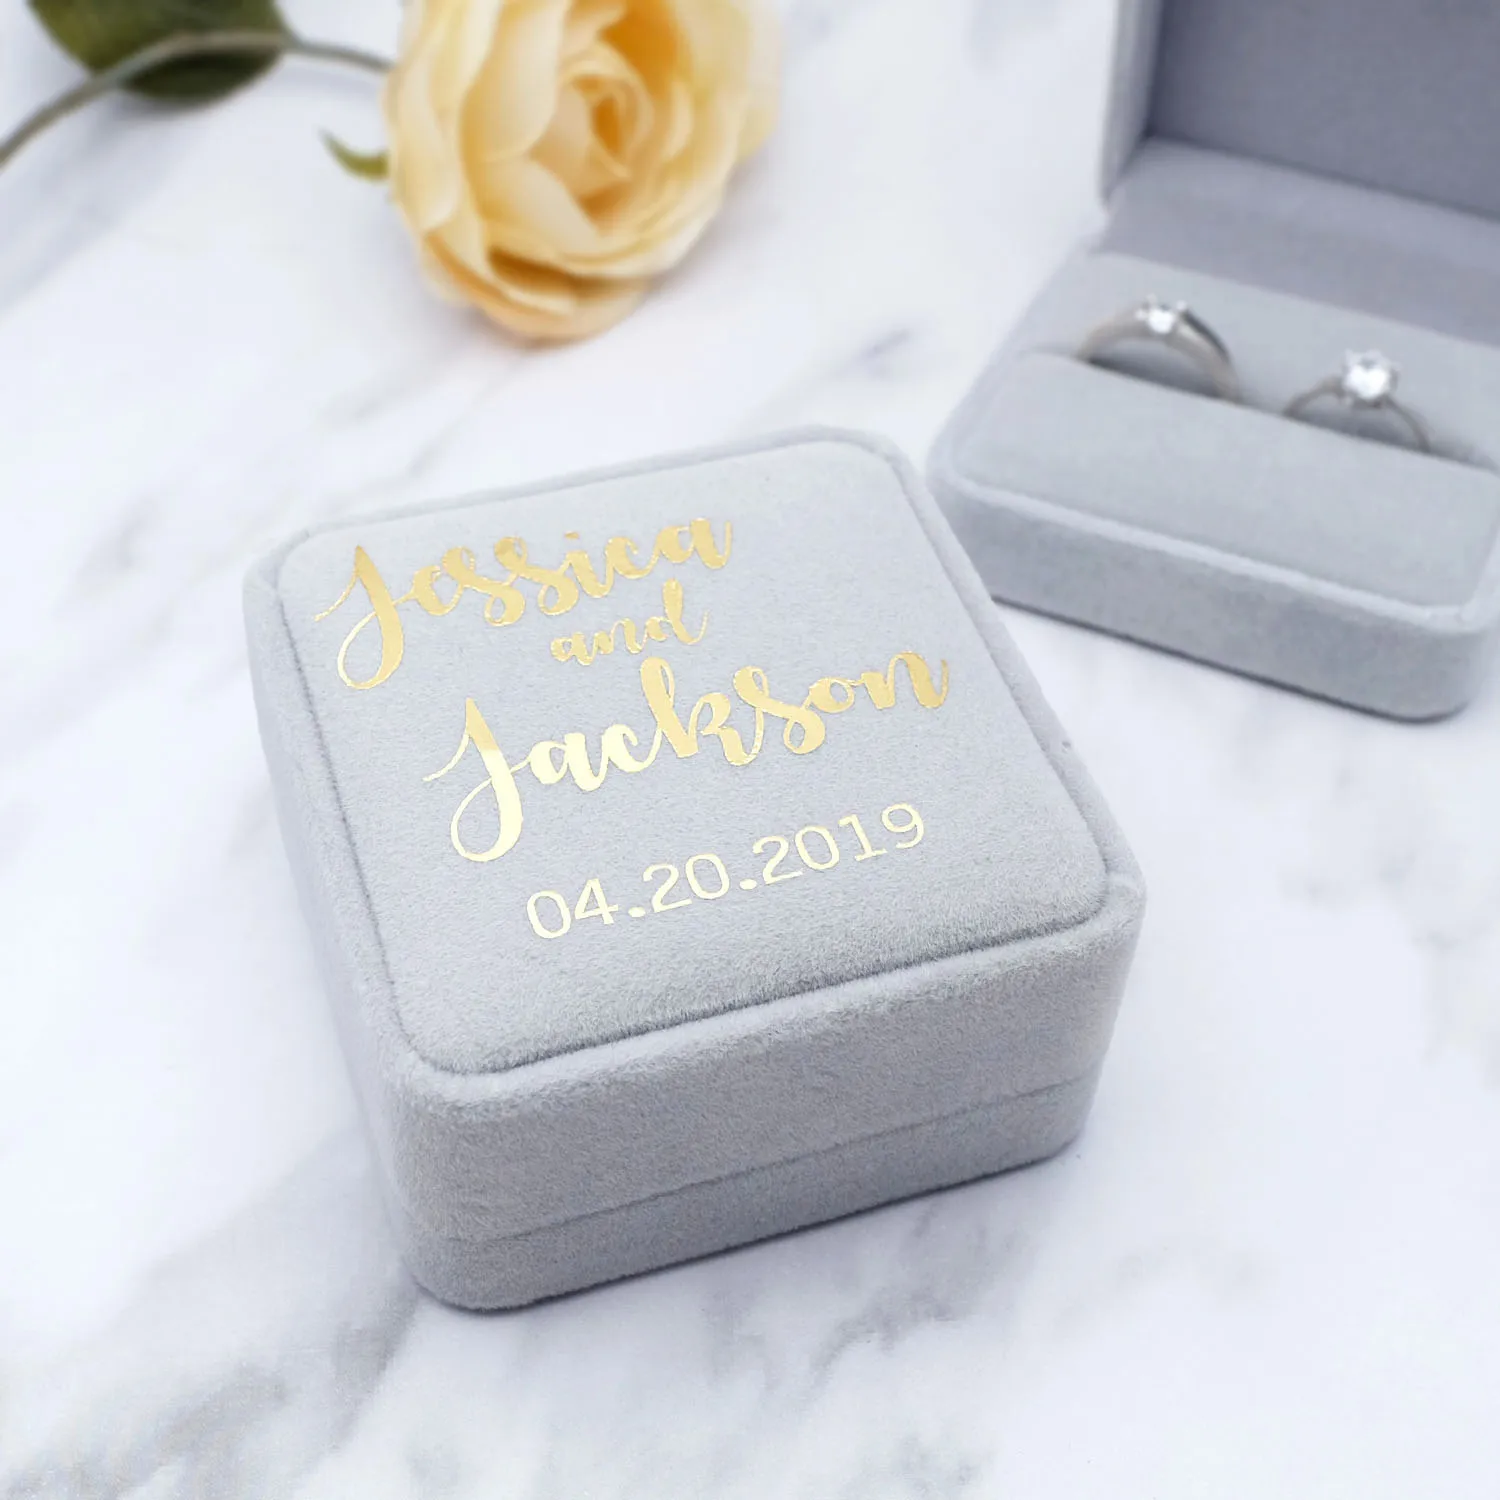 Velvet Ring Box,Personalized Ring Box,Custom Wedding Ring Box,Engagement Wedding Box,Vintage Style,Gift for Wedding - Цвет: Gold Color Text